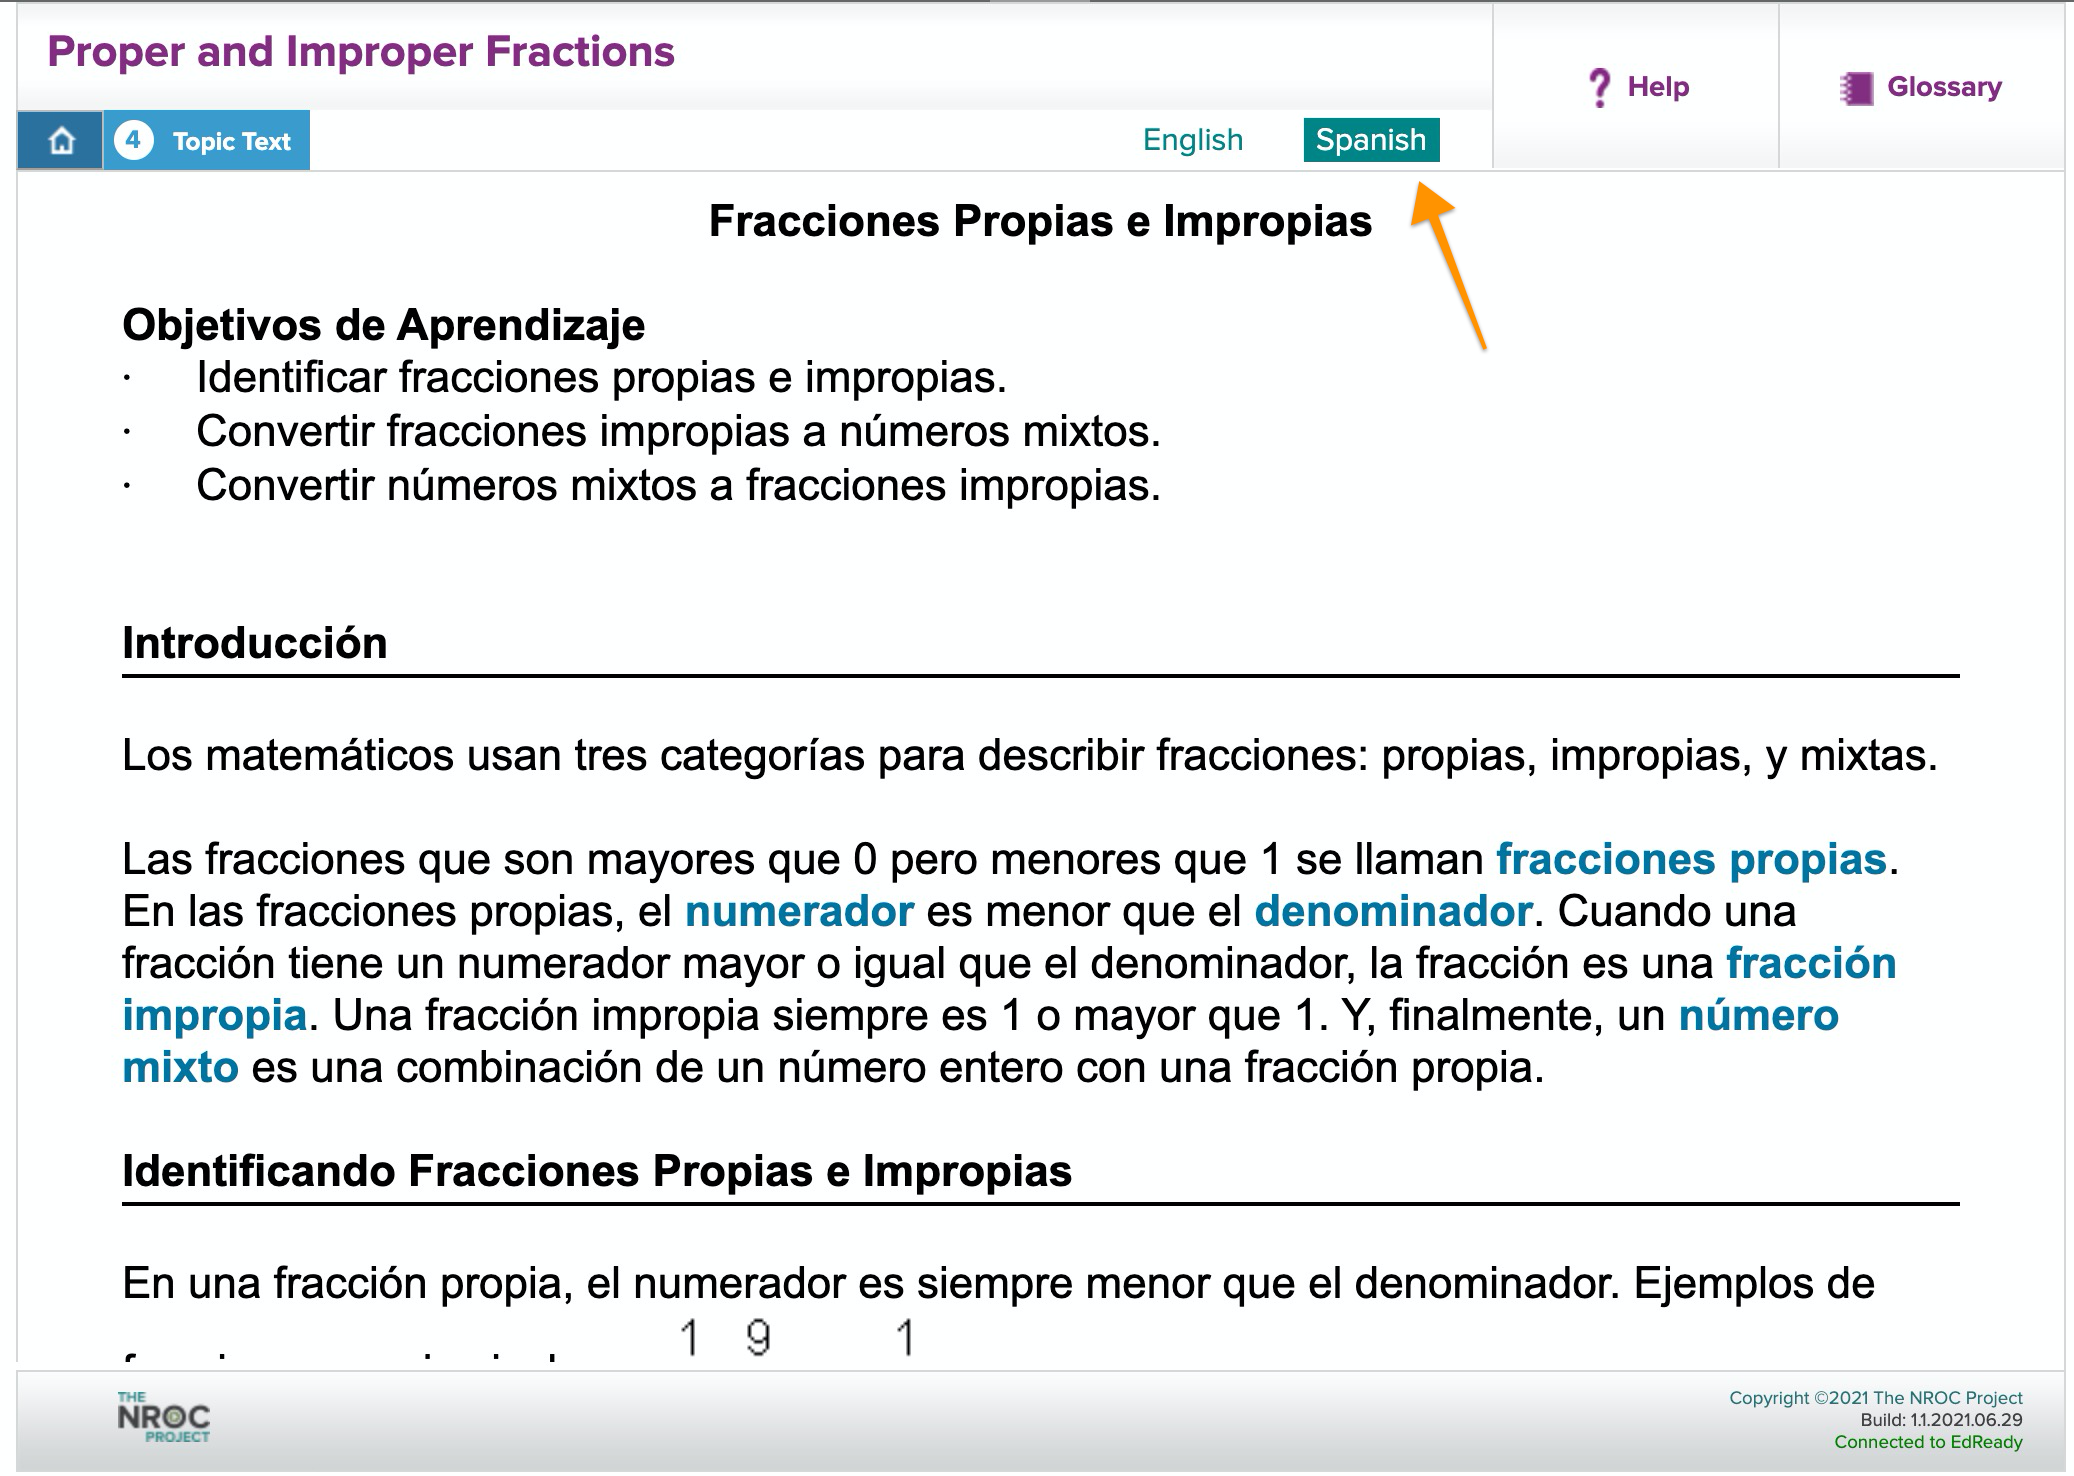 Edready_-_studyPlanindividualResource_Fractions_and_Mixed_Numbers__Proper_and_Improper_Fractions__Resource_Proper_and_Improper_Fractions_2021-08-27_at_9.01.57_AM.jpg